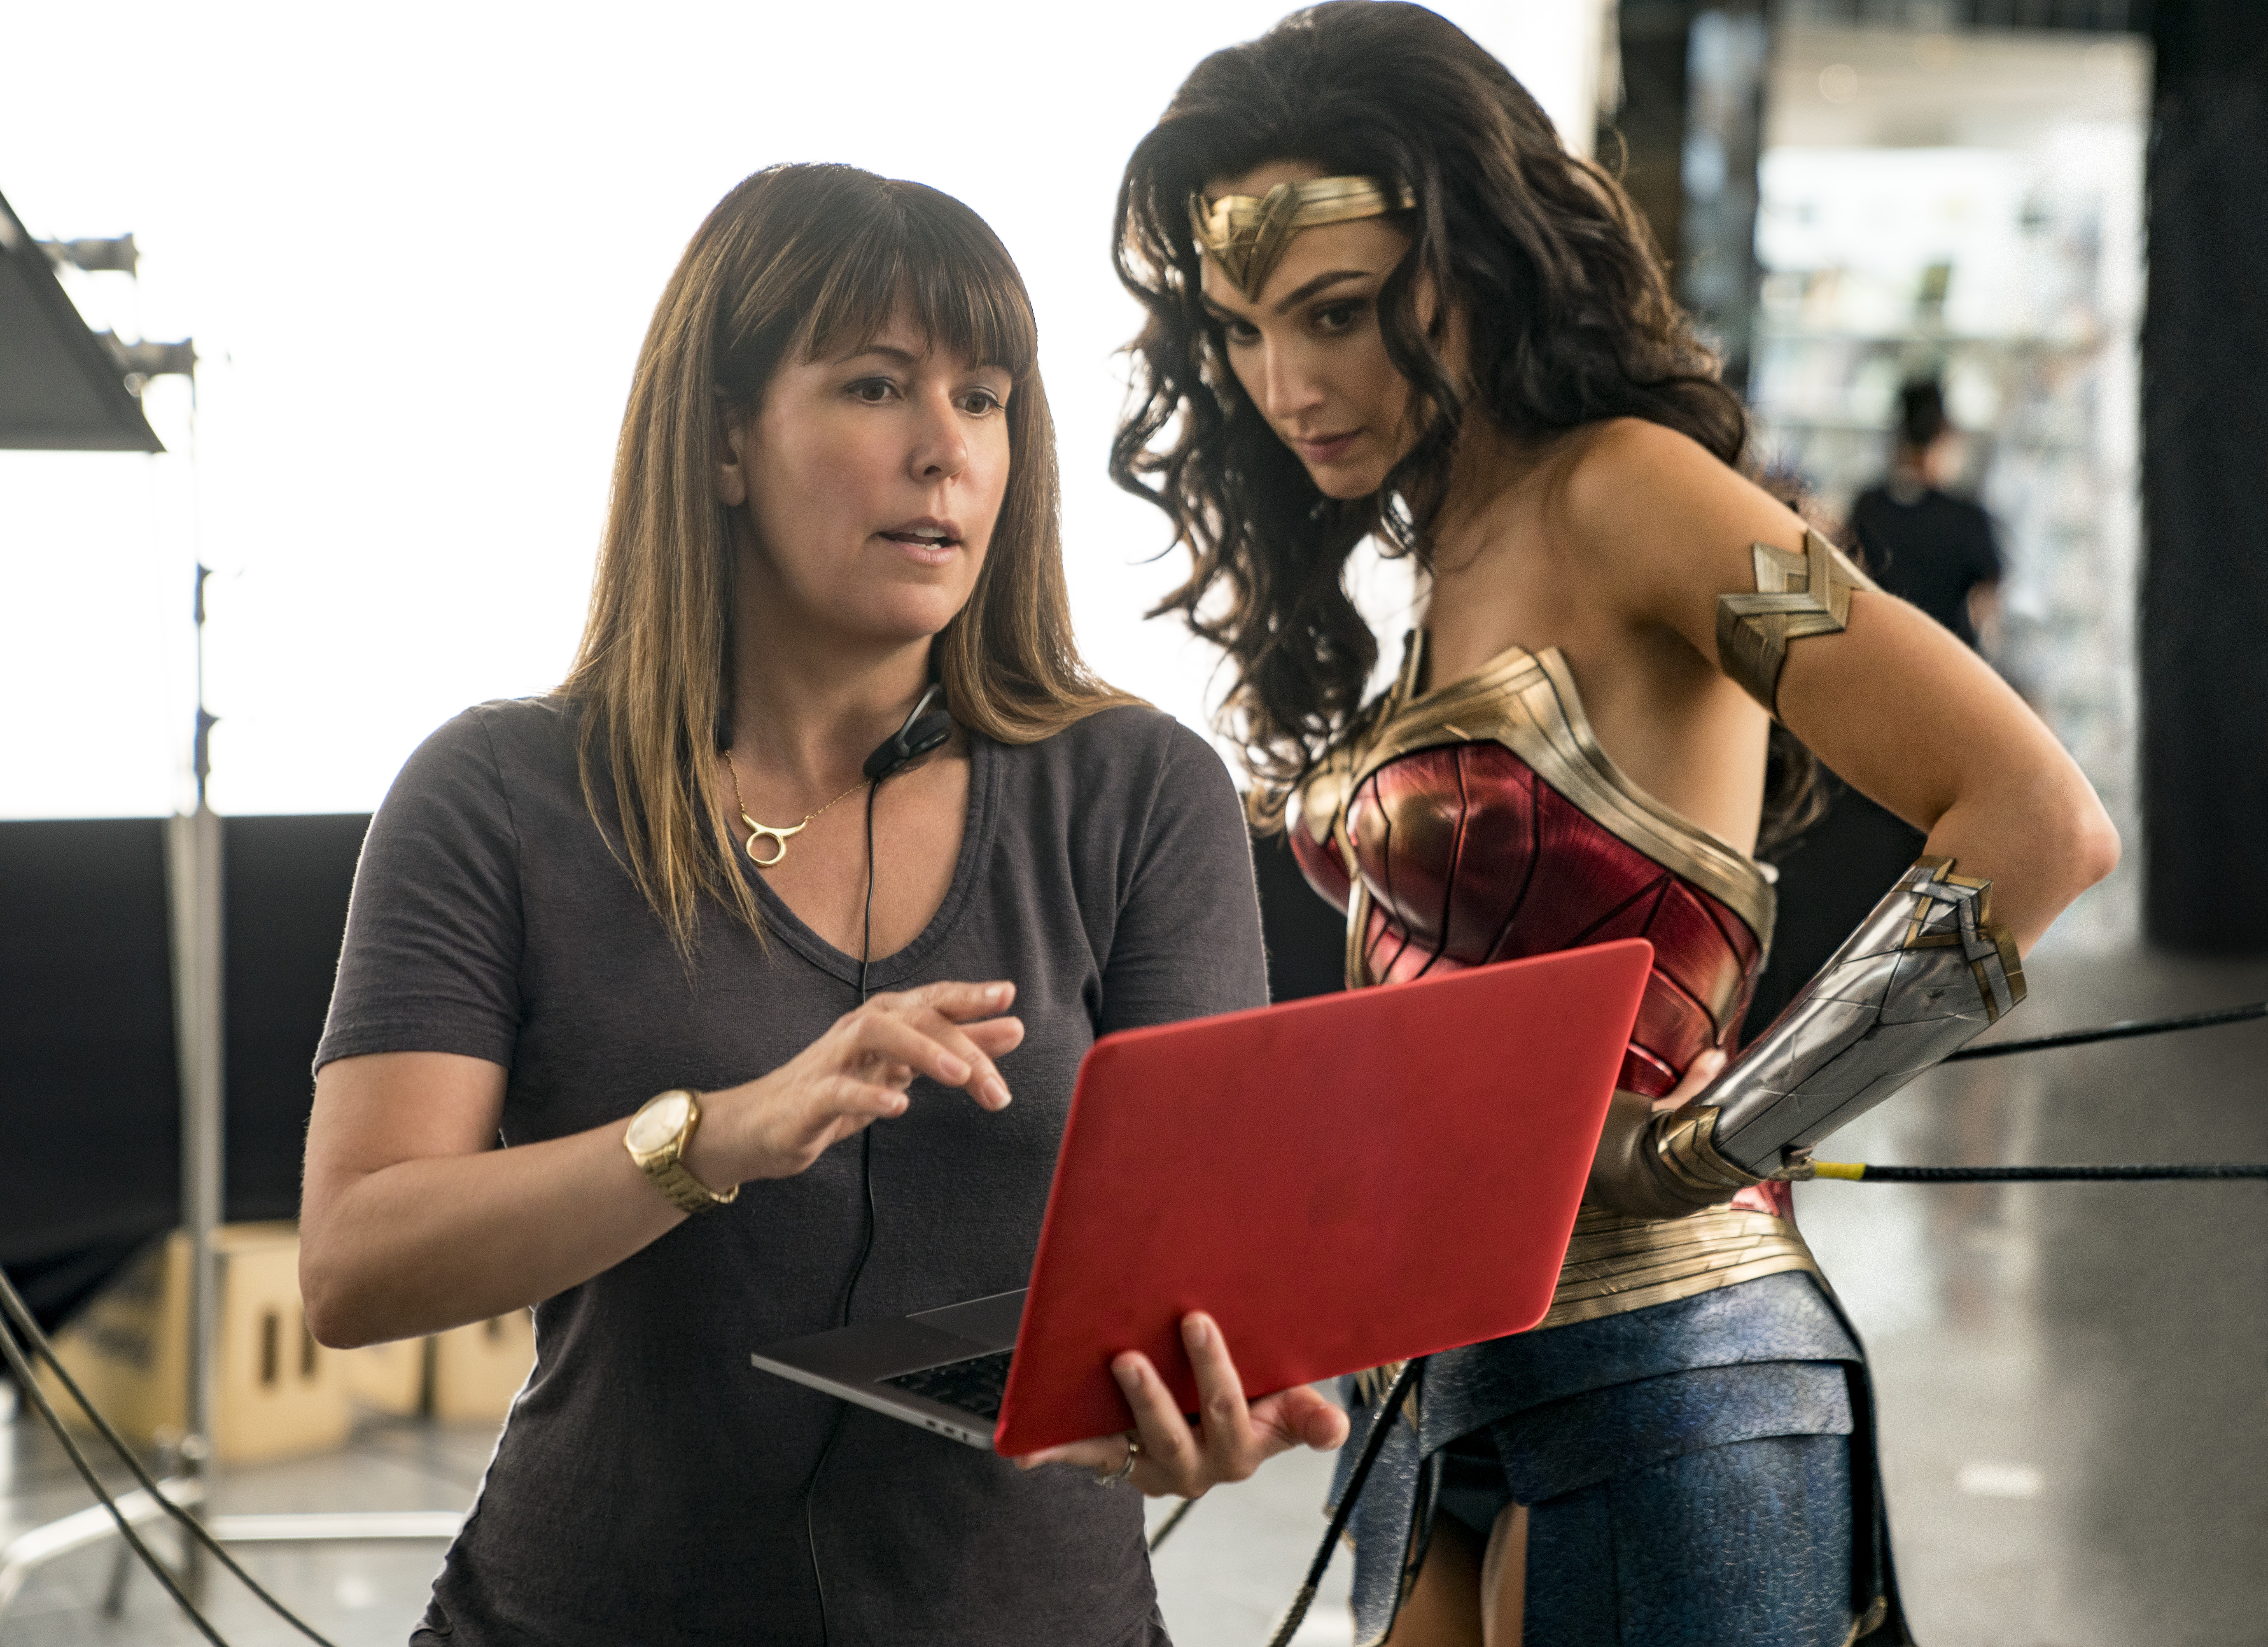 Patty Jenkins and Gal Gadot on set (© 2020 Warner Bros. Entertainment Inc. All Rights Reserved.)